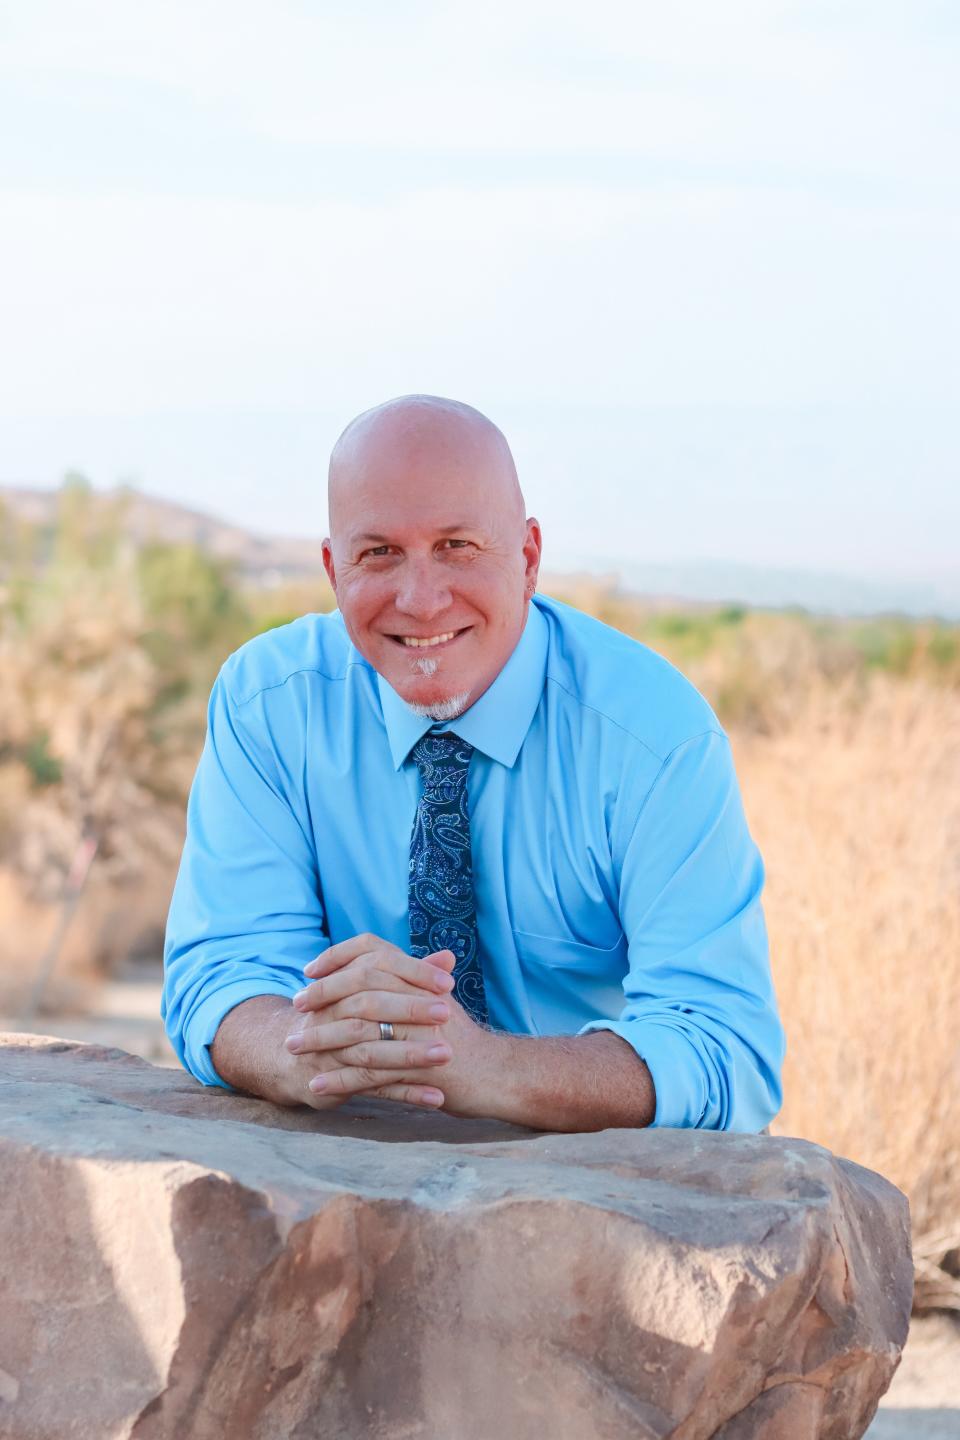 Gregg Akkerman is one of five candidates seeking a seat on the Palm Desert City Council in the Nov. 8 election.